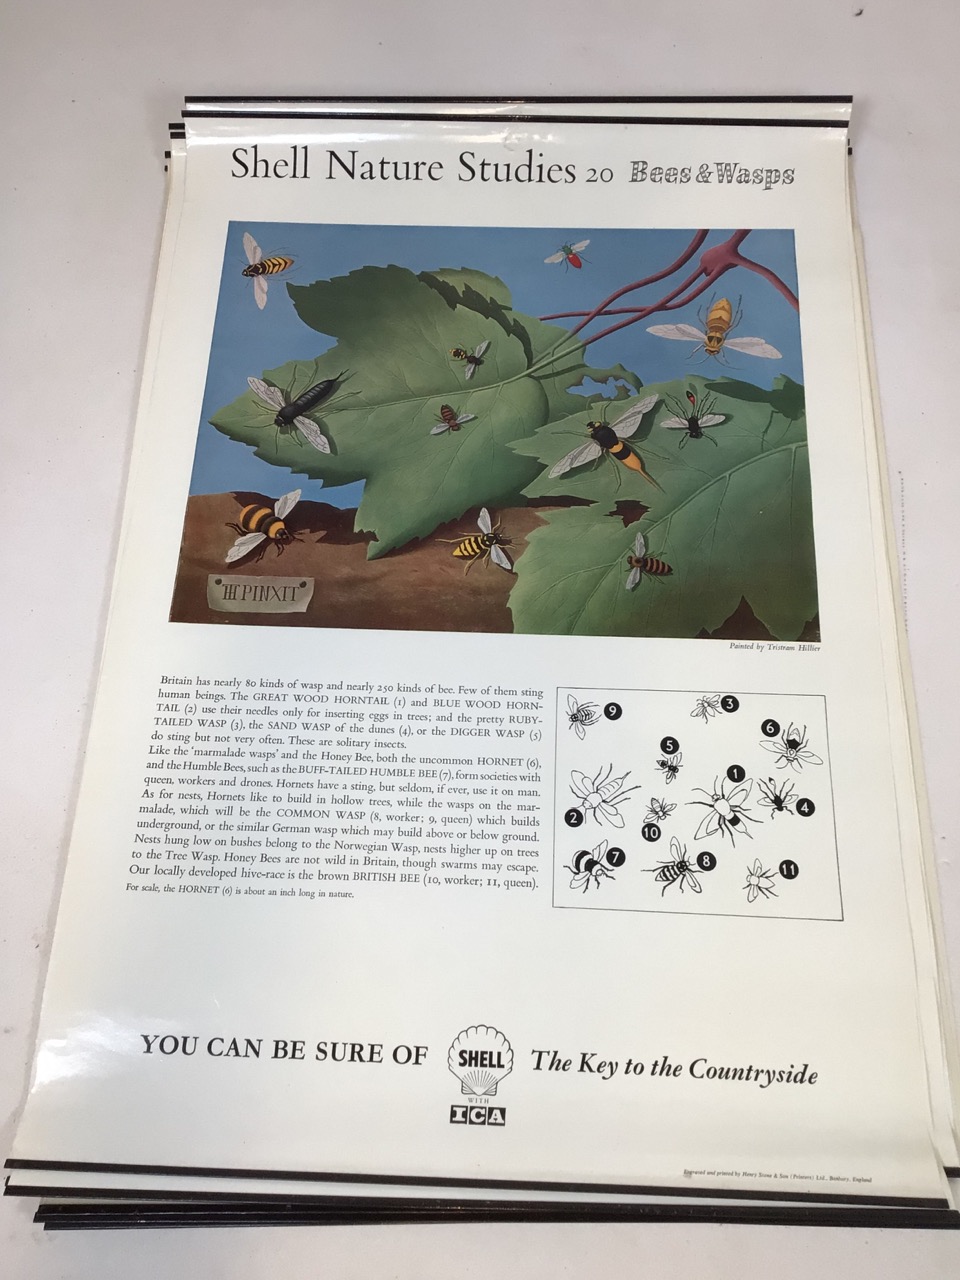 Shell Nature Studies vintage mid century Educational wildlife posters, printed by Henry Stone & Son. - Image 10 of 14